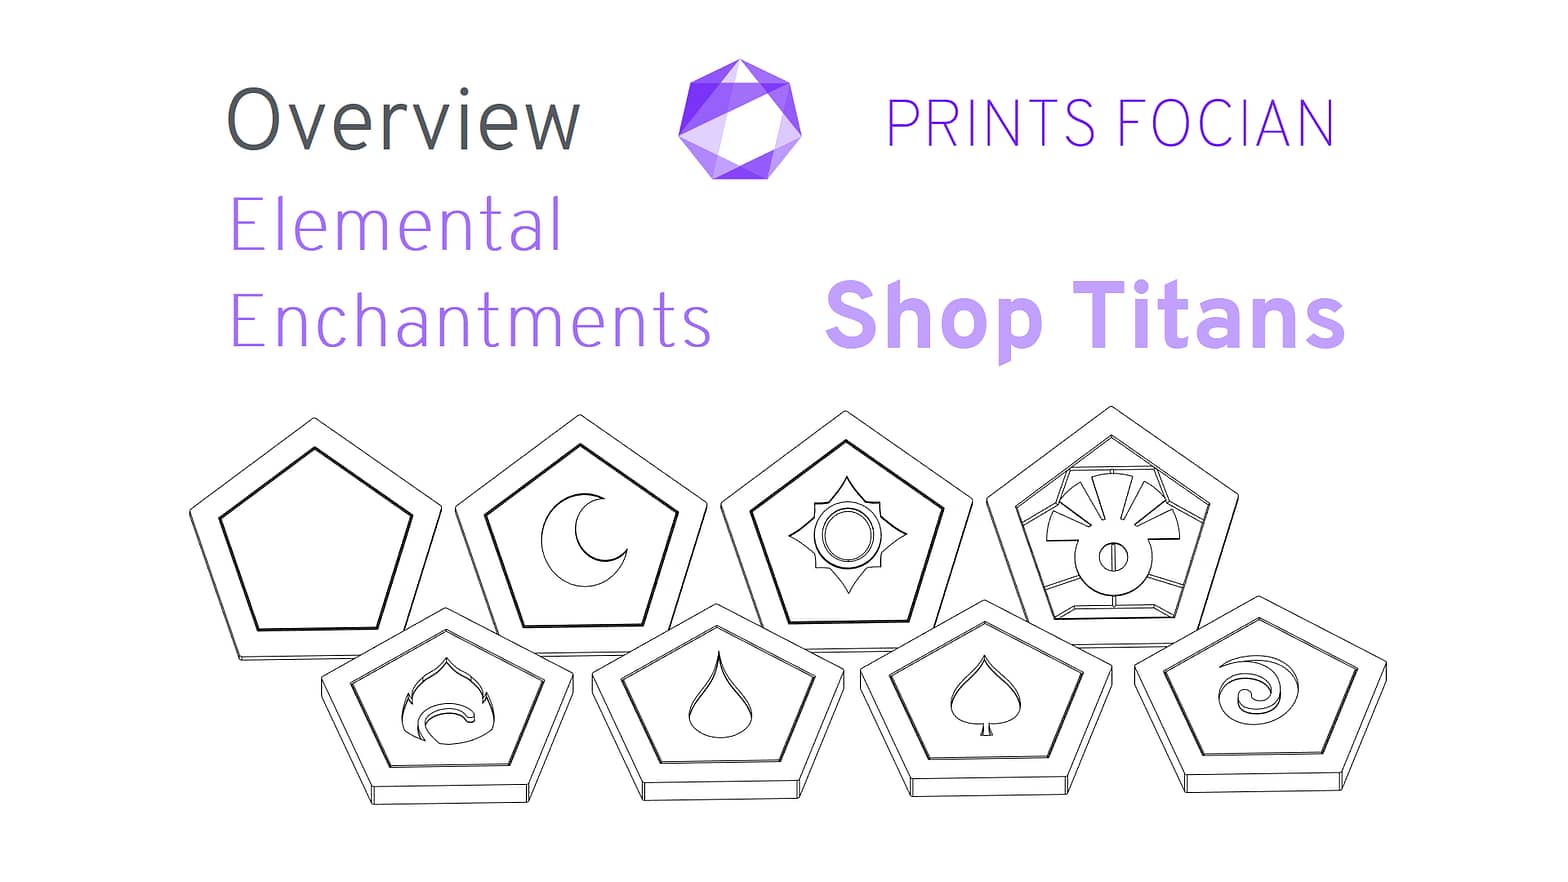 Wireframe image of the eight enchantments on a white background. Prints Focian Icon top and central. Text: Purple Prints Focian, Shop Titans, Elemental Enchantments. Dark grey text Overview